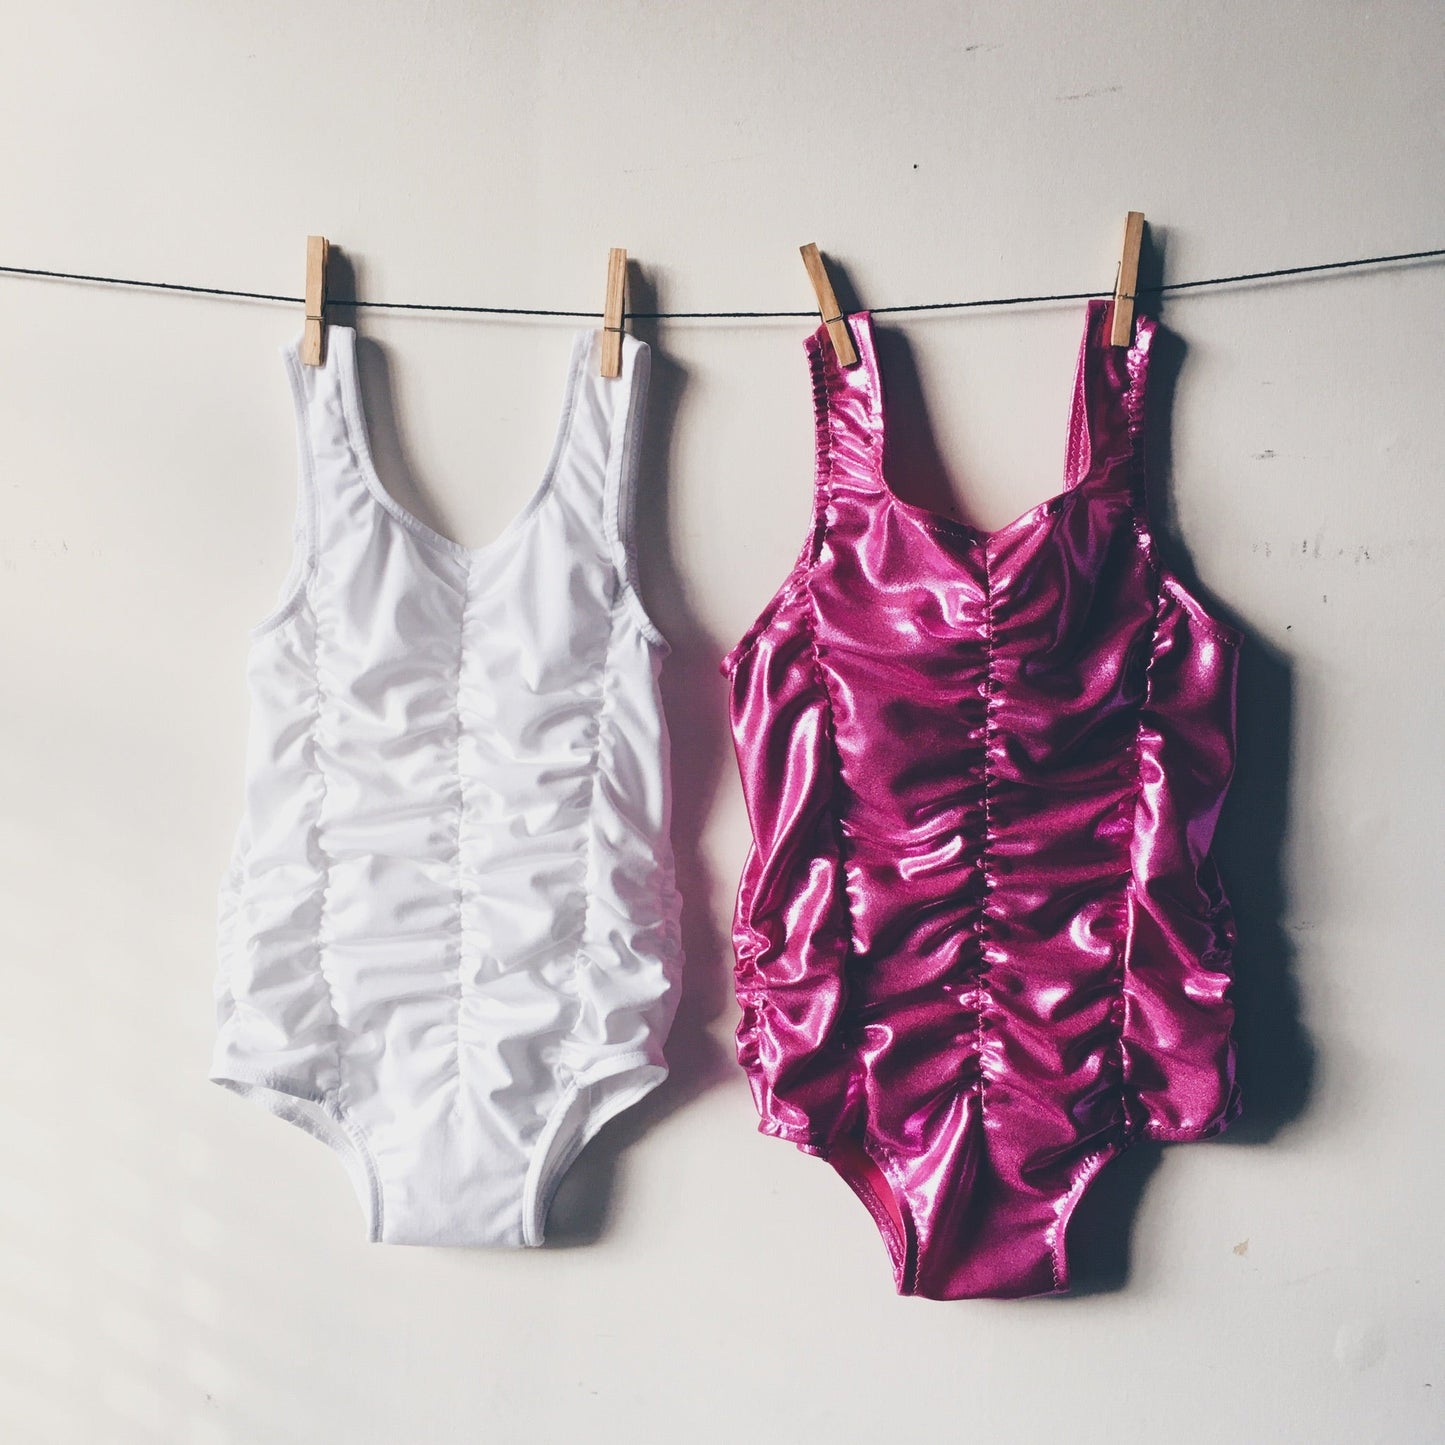 Two, Tallulah Ruched Leotards pegged on a line against a wall. White on the left and Pink on the right